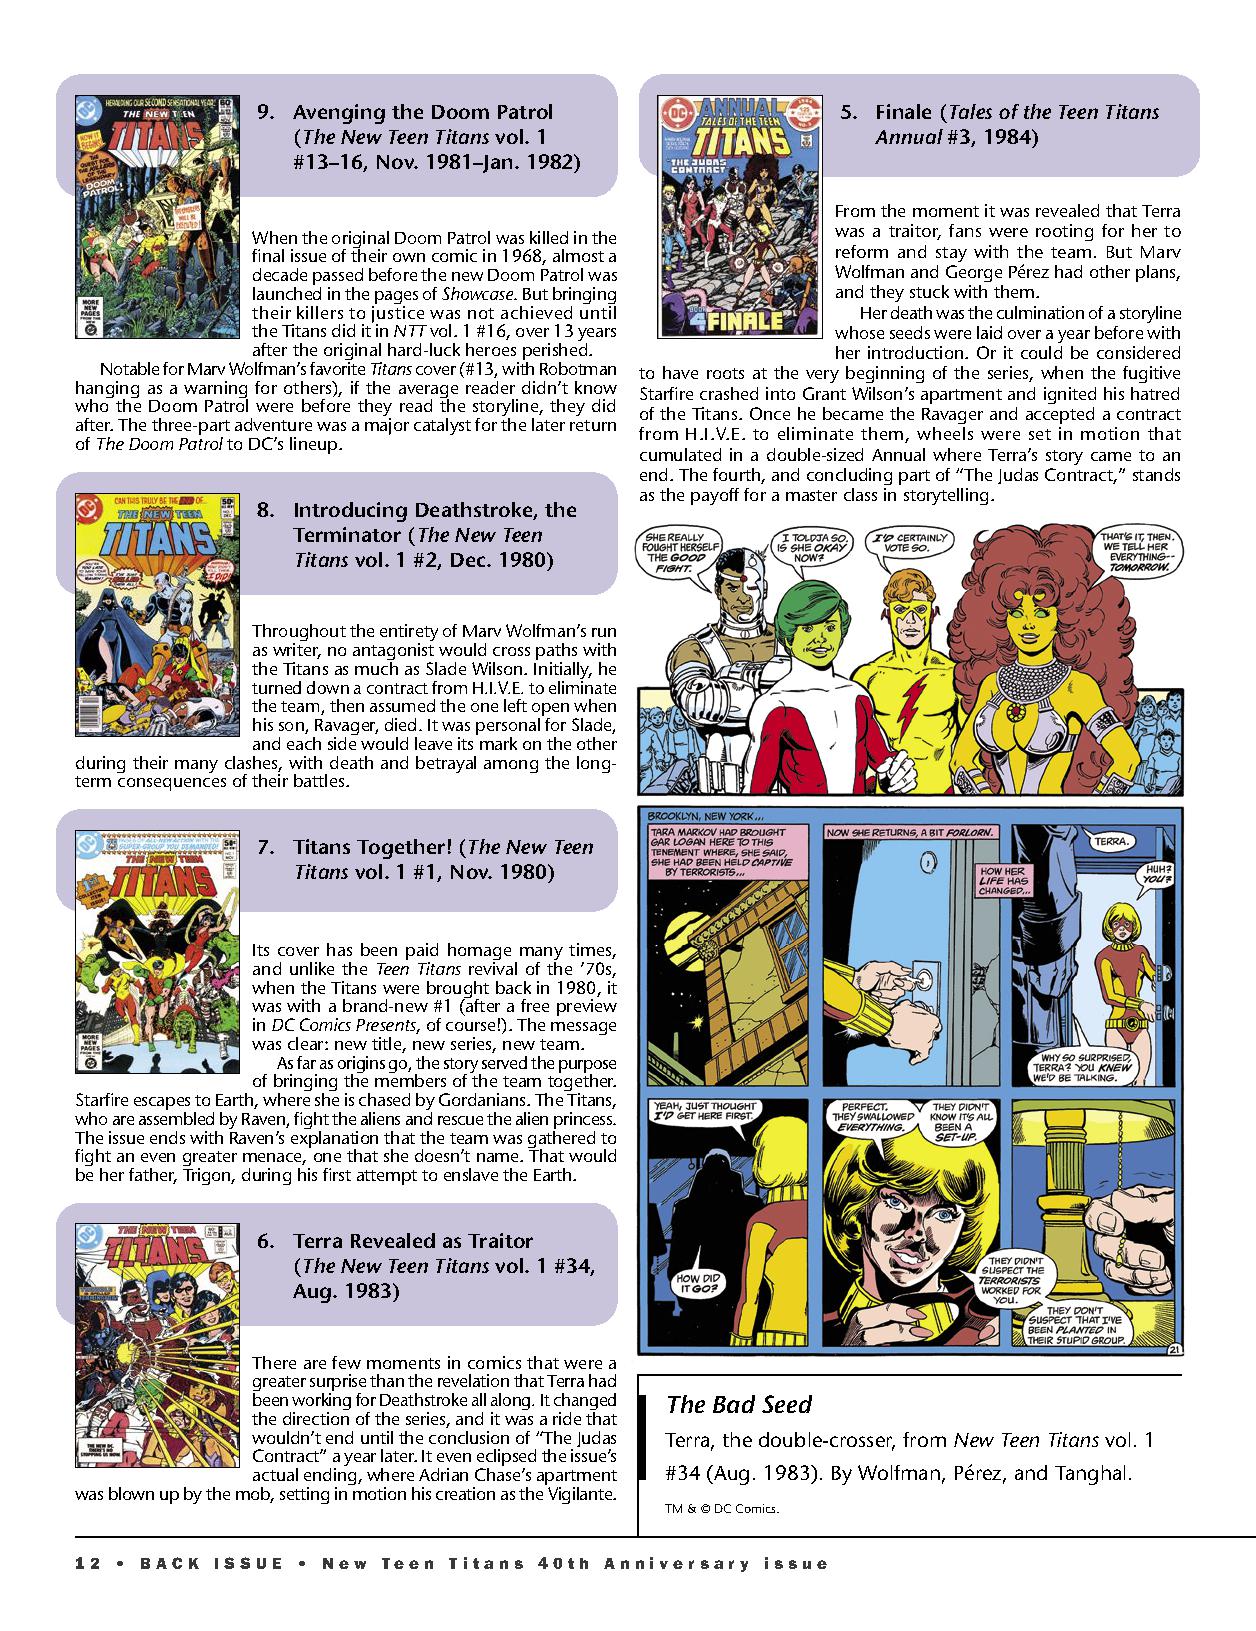 Read online Back Issue comic -  Issue #122 - 14